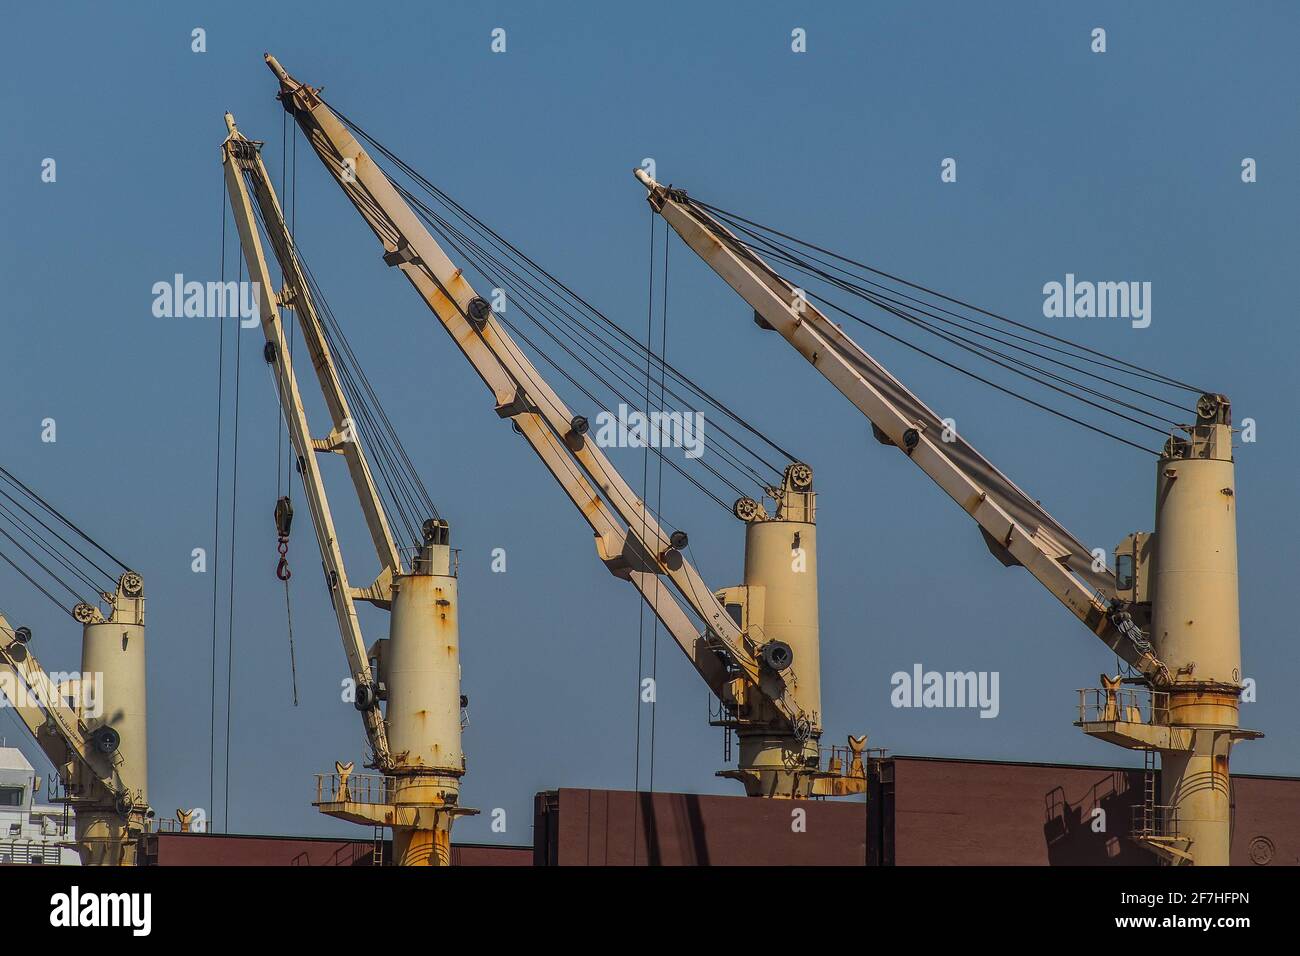 A set of white cranes or elevators mounted on a cargo ship. Stock Photo